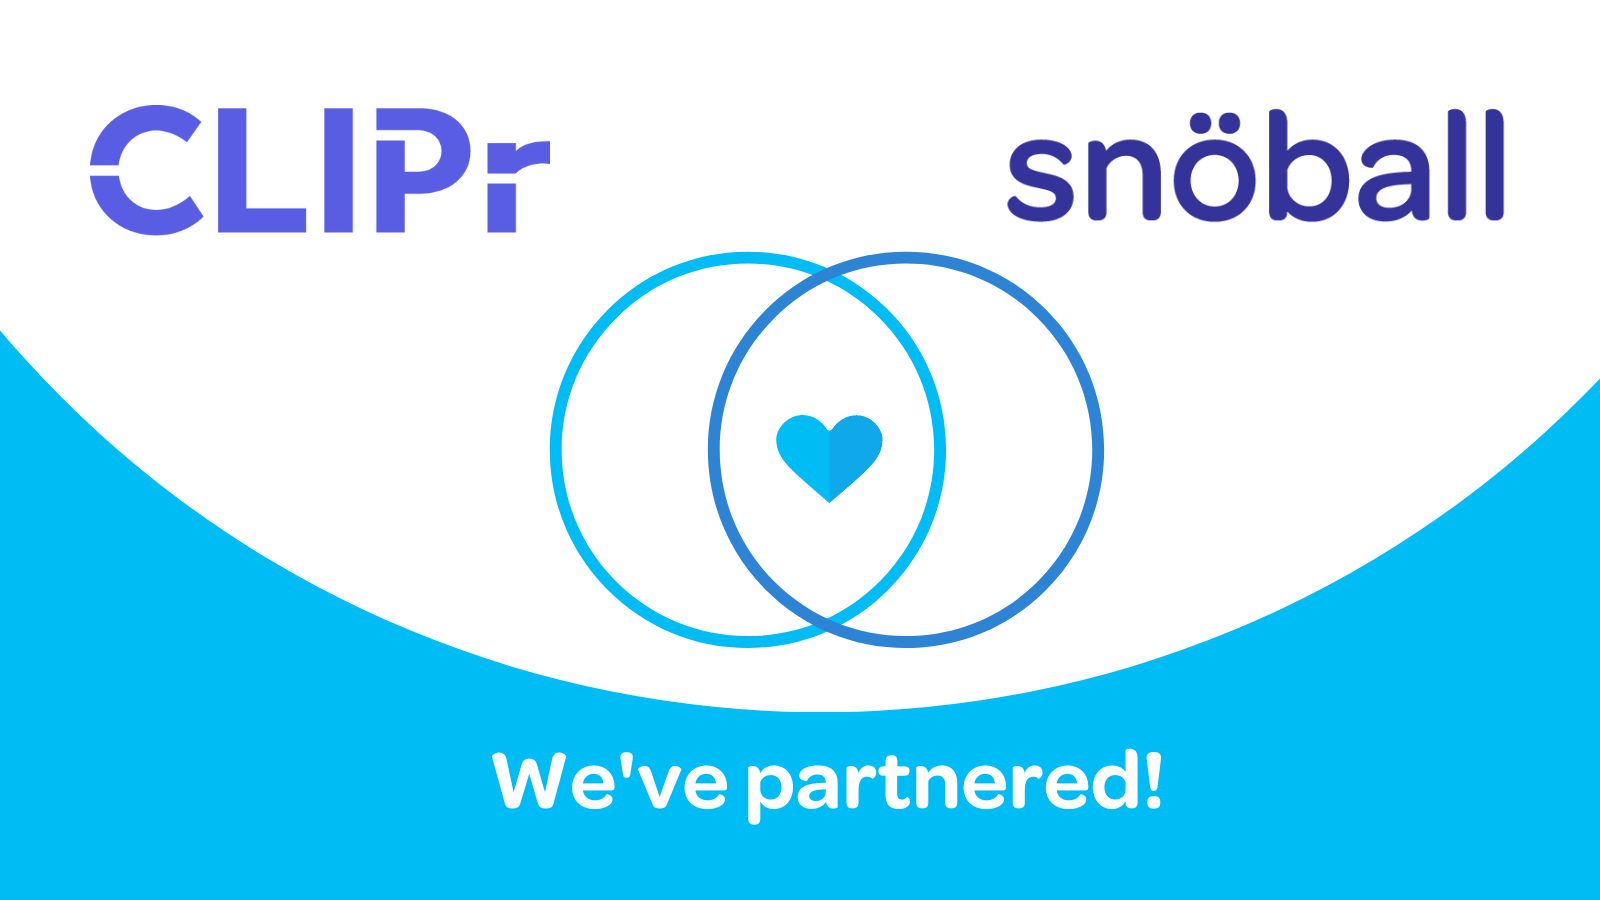 Snöball partners with CLIPr